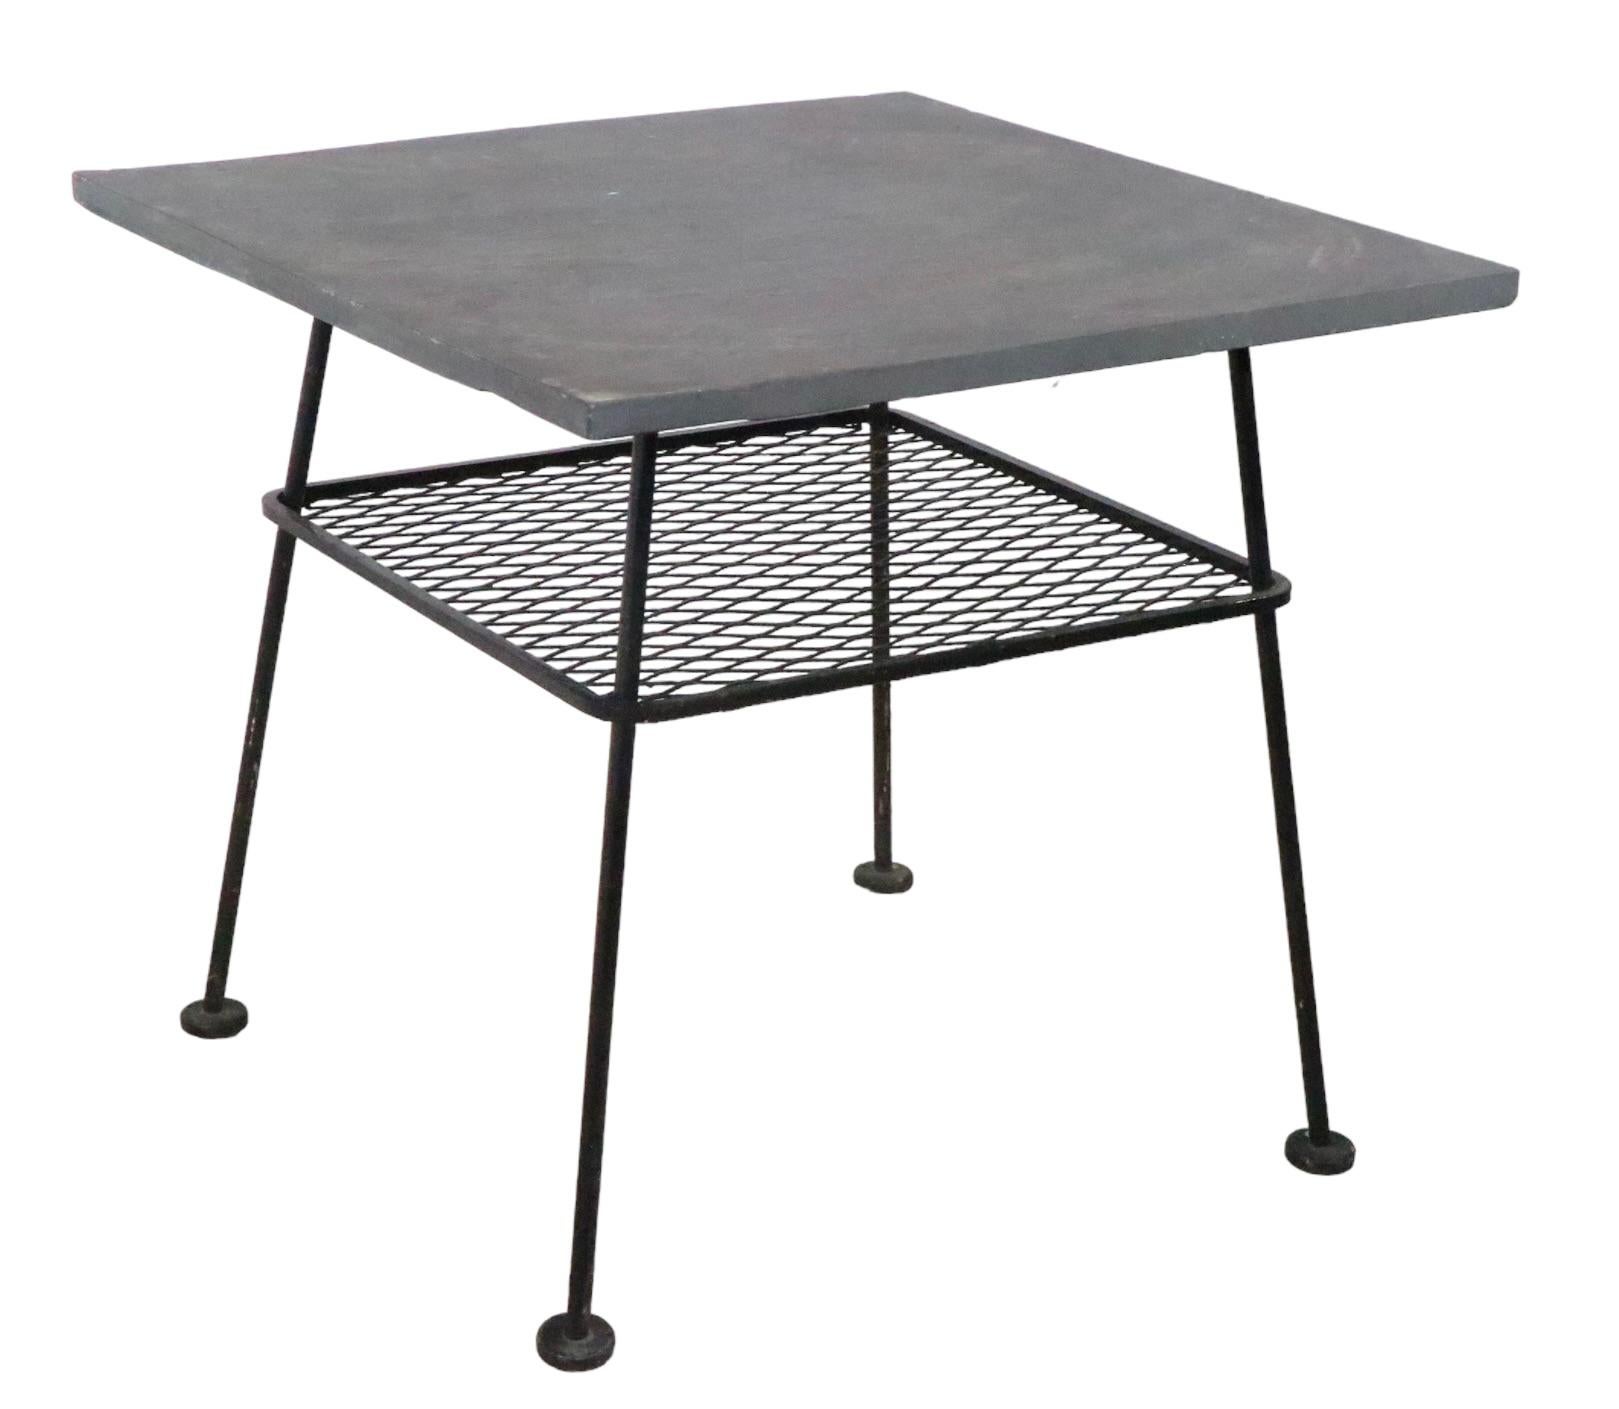 Wrought Iron and Slate Garden Patio, Sunroom Table After McCobb, Woodard, 1950s For Sale 1